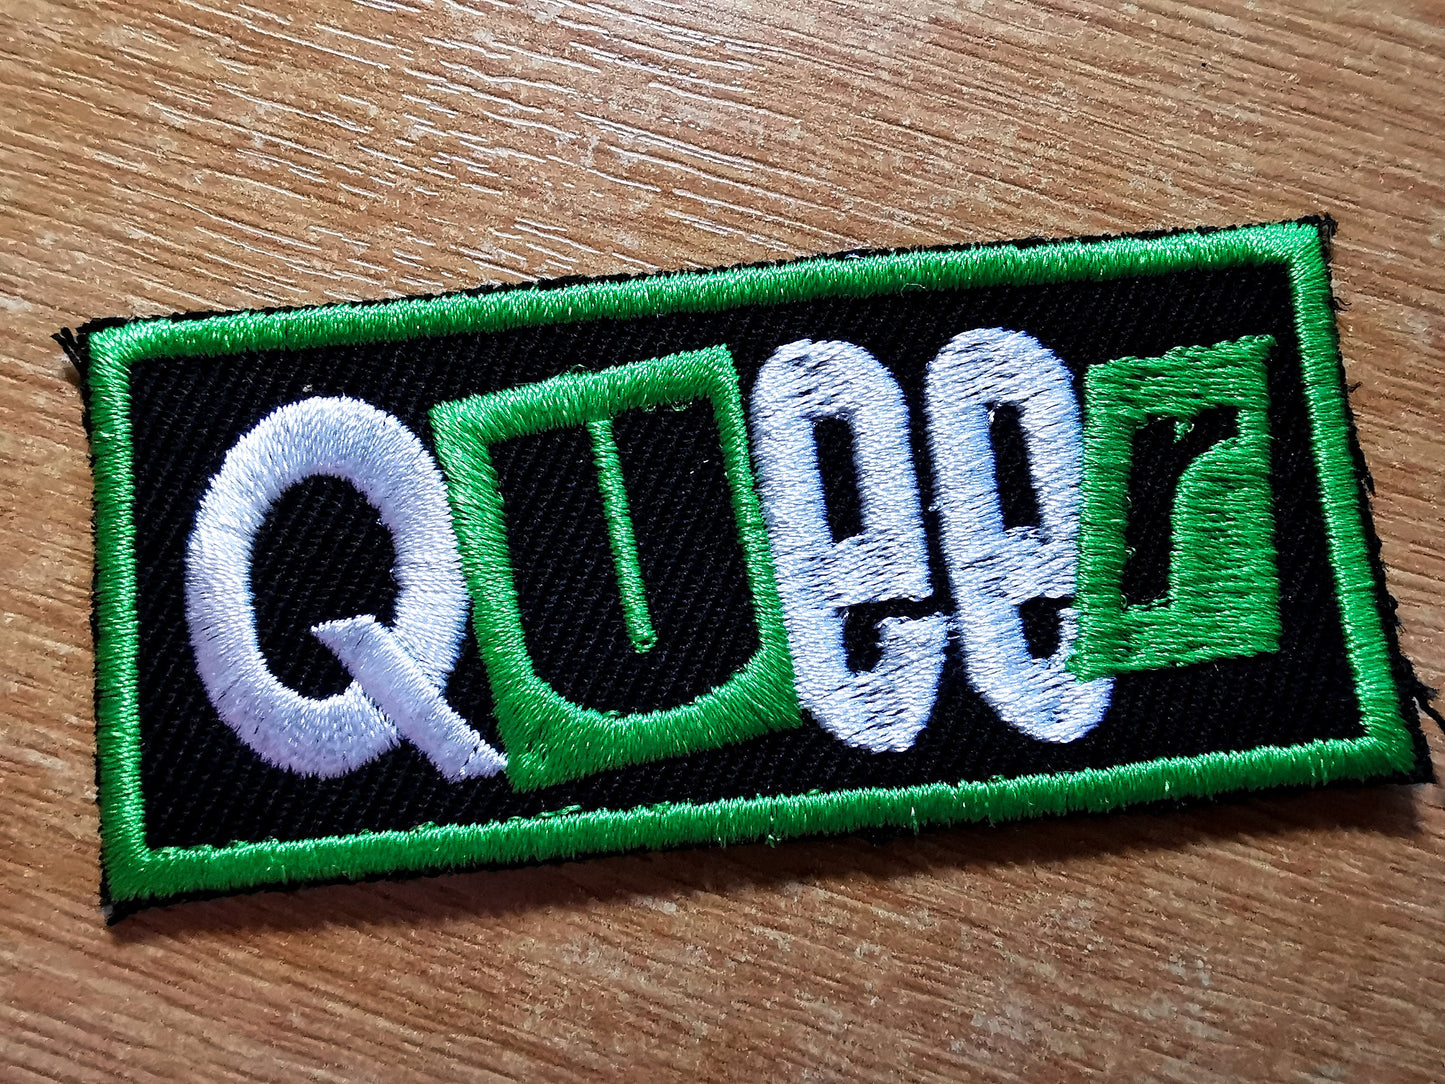 Queer Punk LGBTQ+ Iron On Patch Pride Embroidered Patches